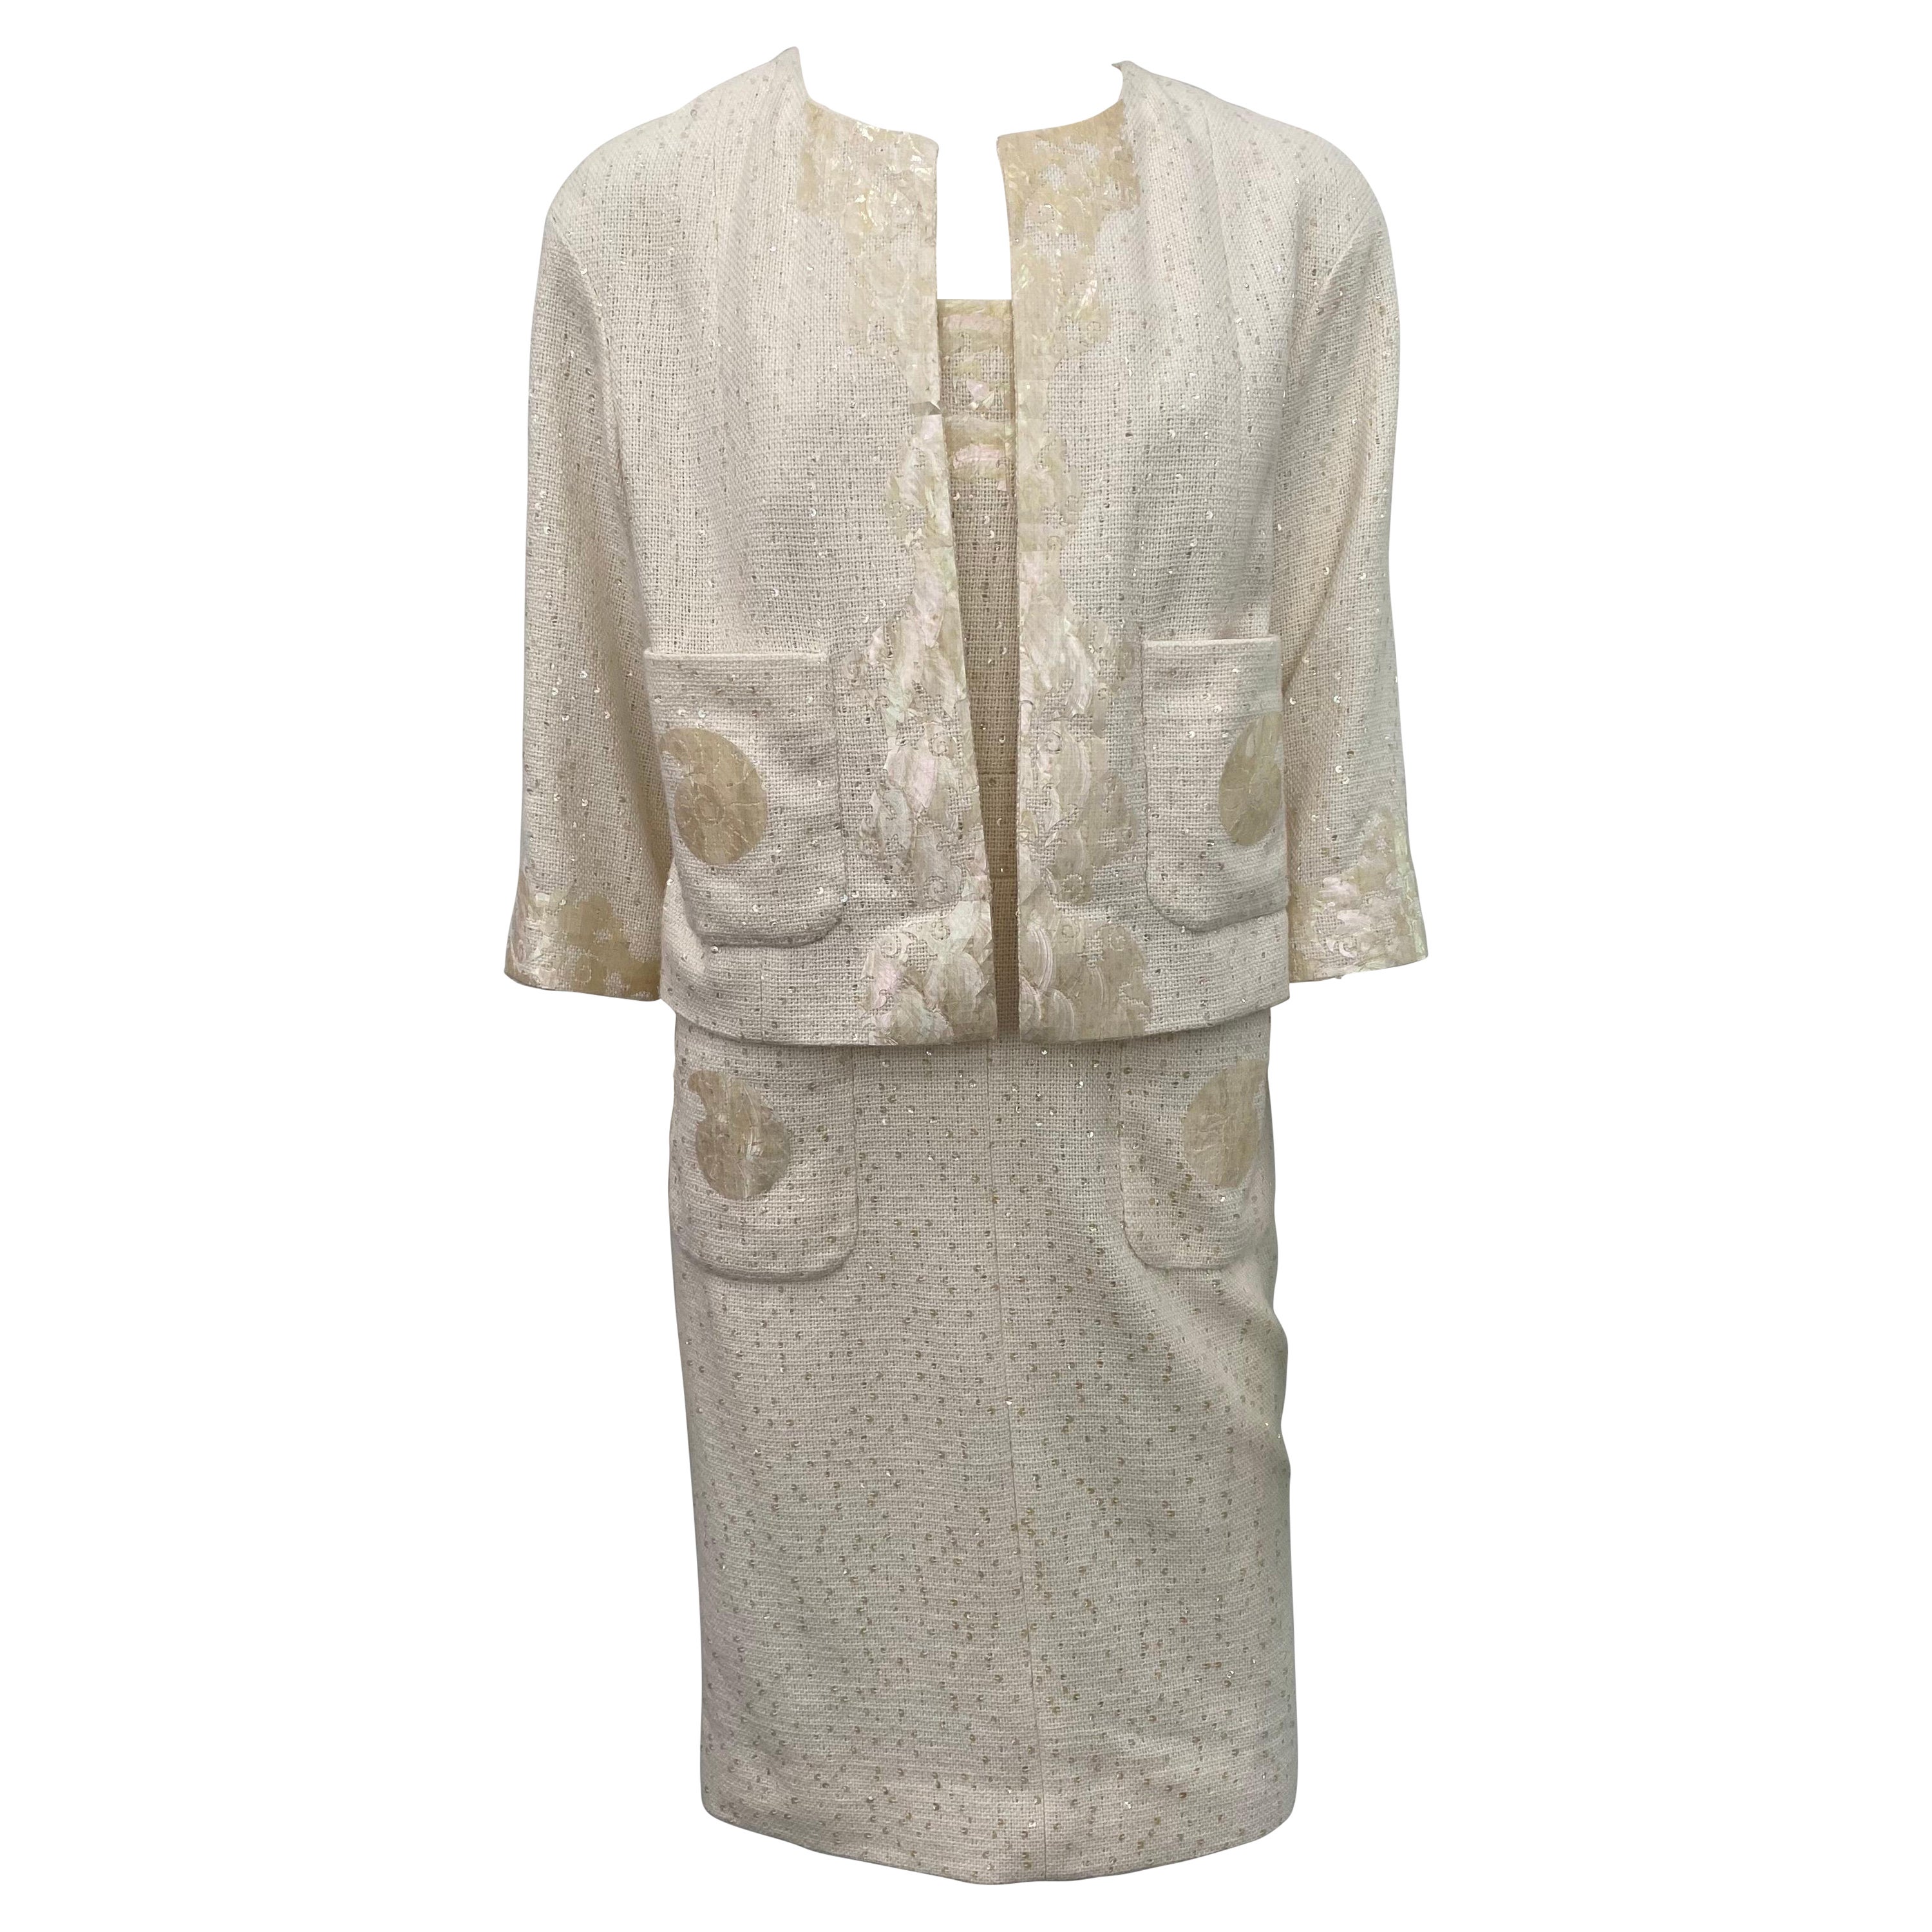 Chanel Runway 2012P Cream Cotton Embellished Strapless Dress with Jacket-Sz 40  For Sale